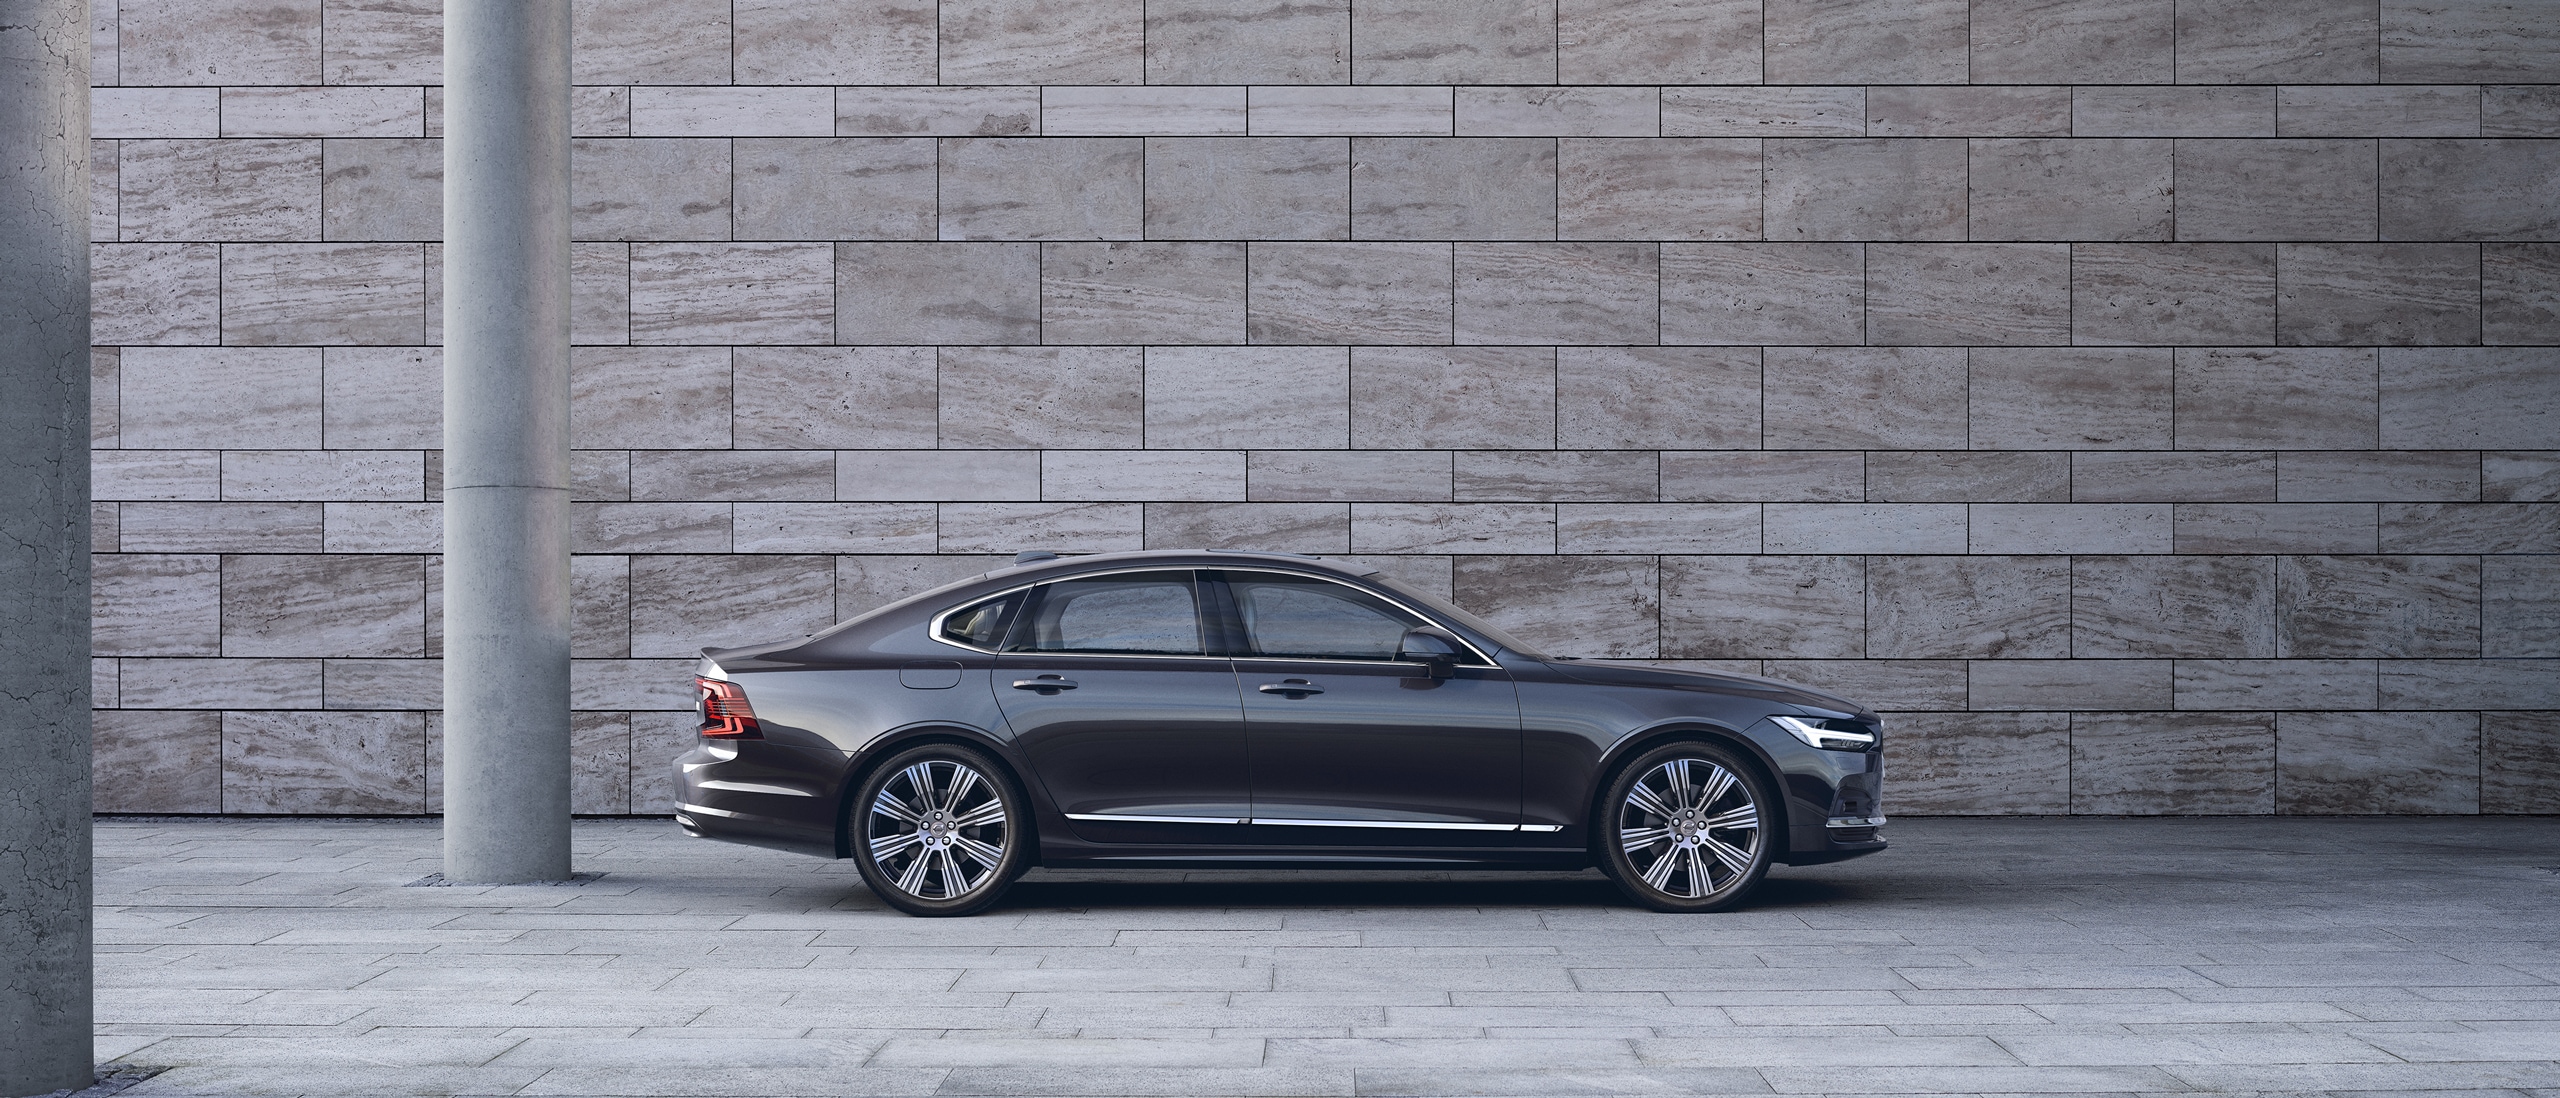 Volvo S90 seen from side parked in front of grey concrete wall.